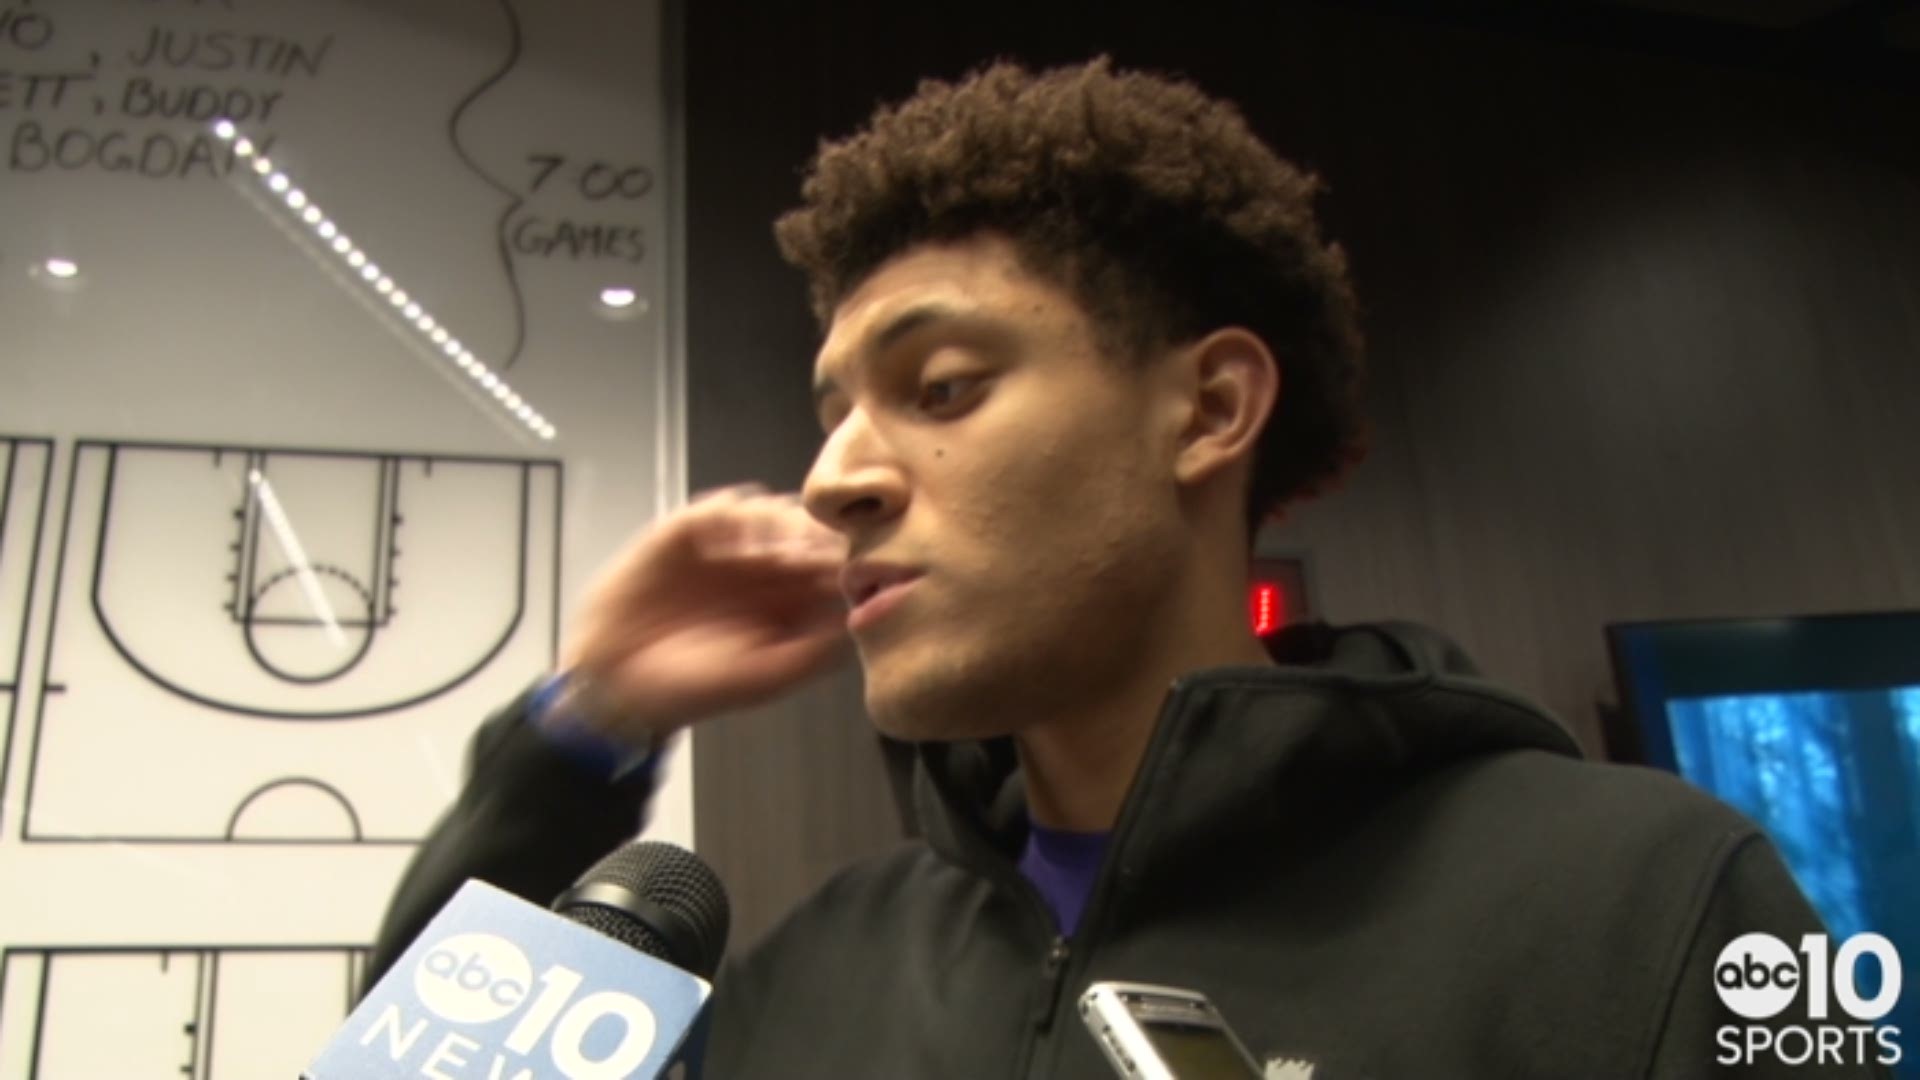 Kings rookie forward Justin Jackson talks about the strange atmosphere and small crowd after the arena was locked down, due to the Stephon Clark protests outside the Golden 1 Center during the game.